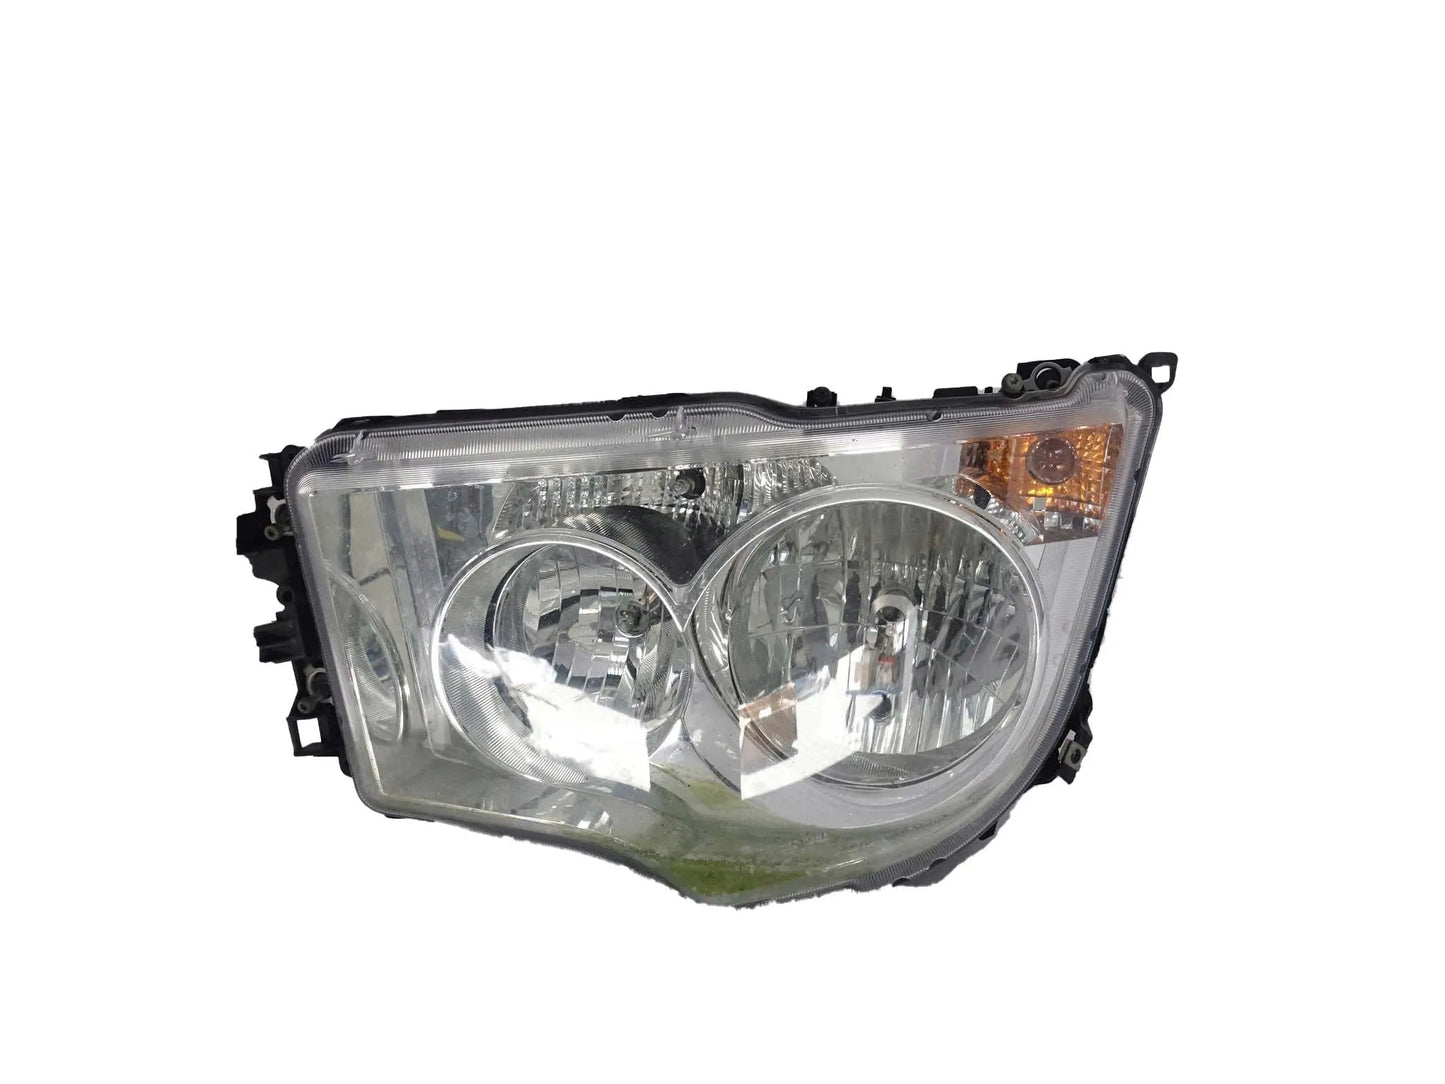 CHINA Factory Wholesale 9618208861 9618204239 9608202039 A9618204239 A9608202039 A9618208861 Head Lamp Left For MERCEDES BENZ Actros MP4 FANCHANTS China Auto Parts Wholesales